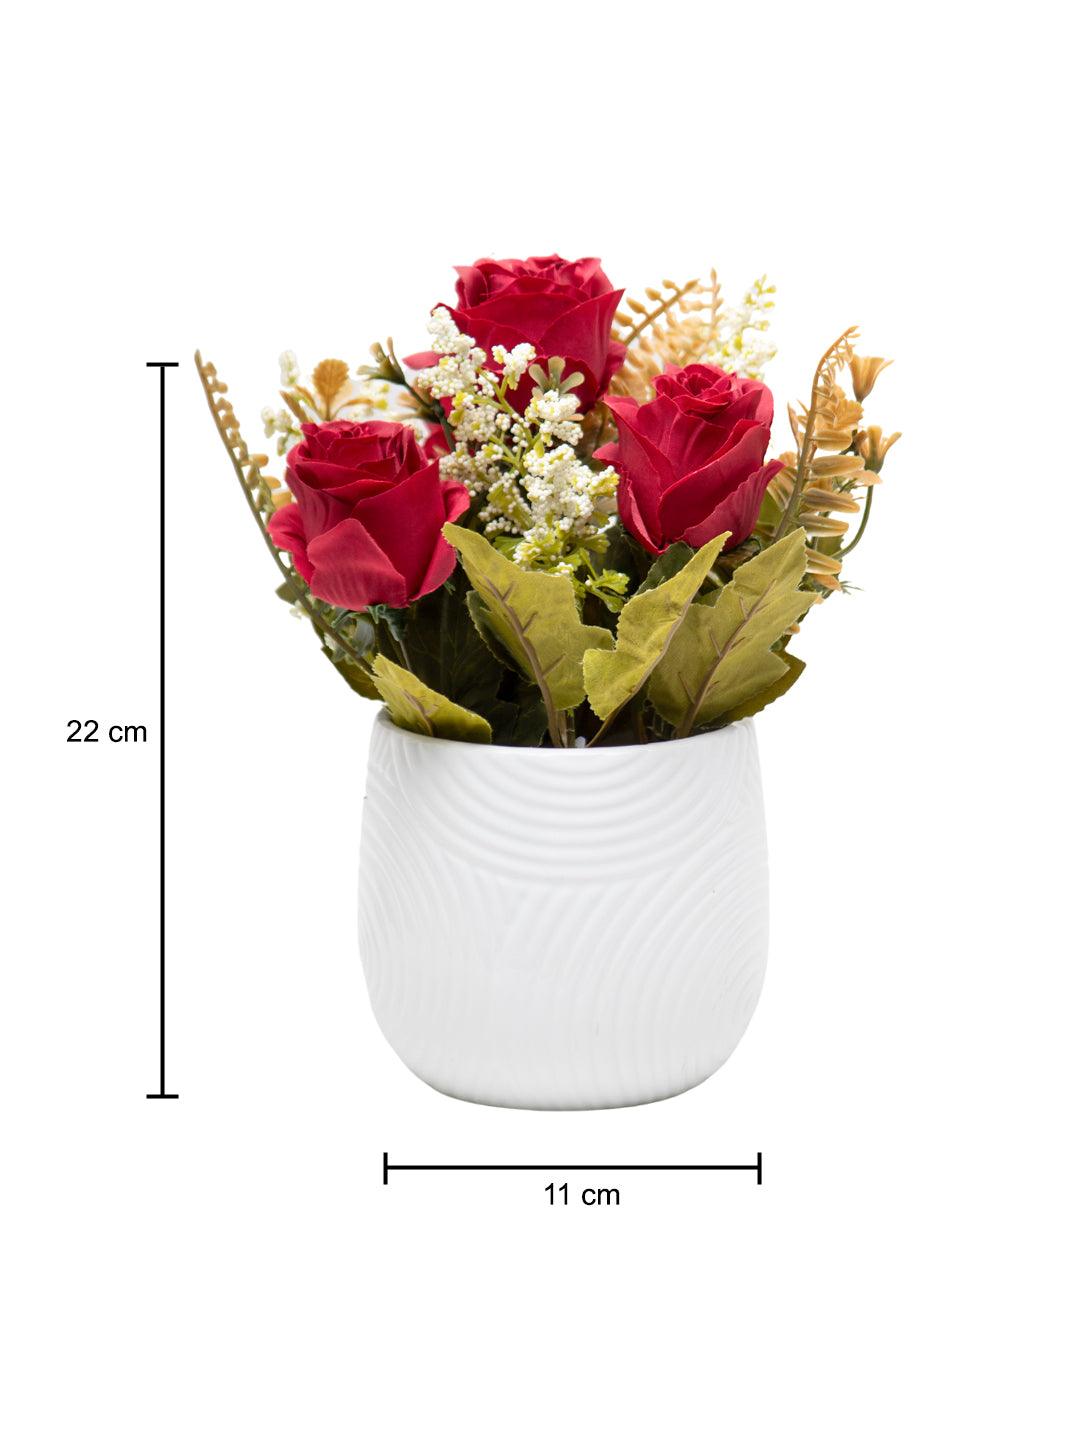 Dark Red Roses With Turquoise Pot - MARKET 99